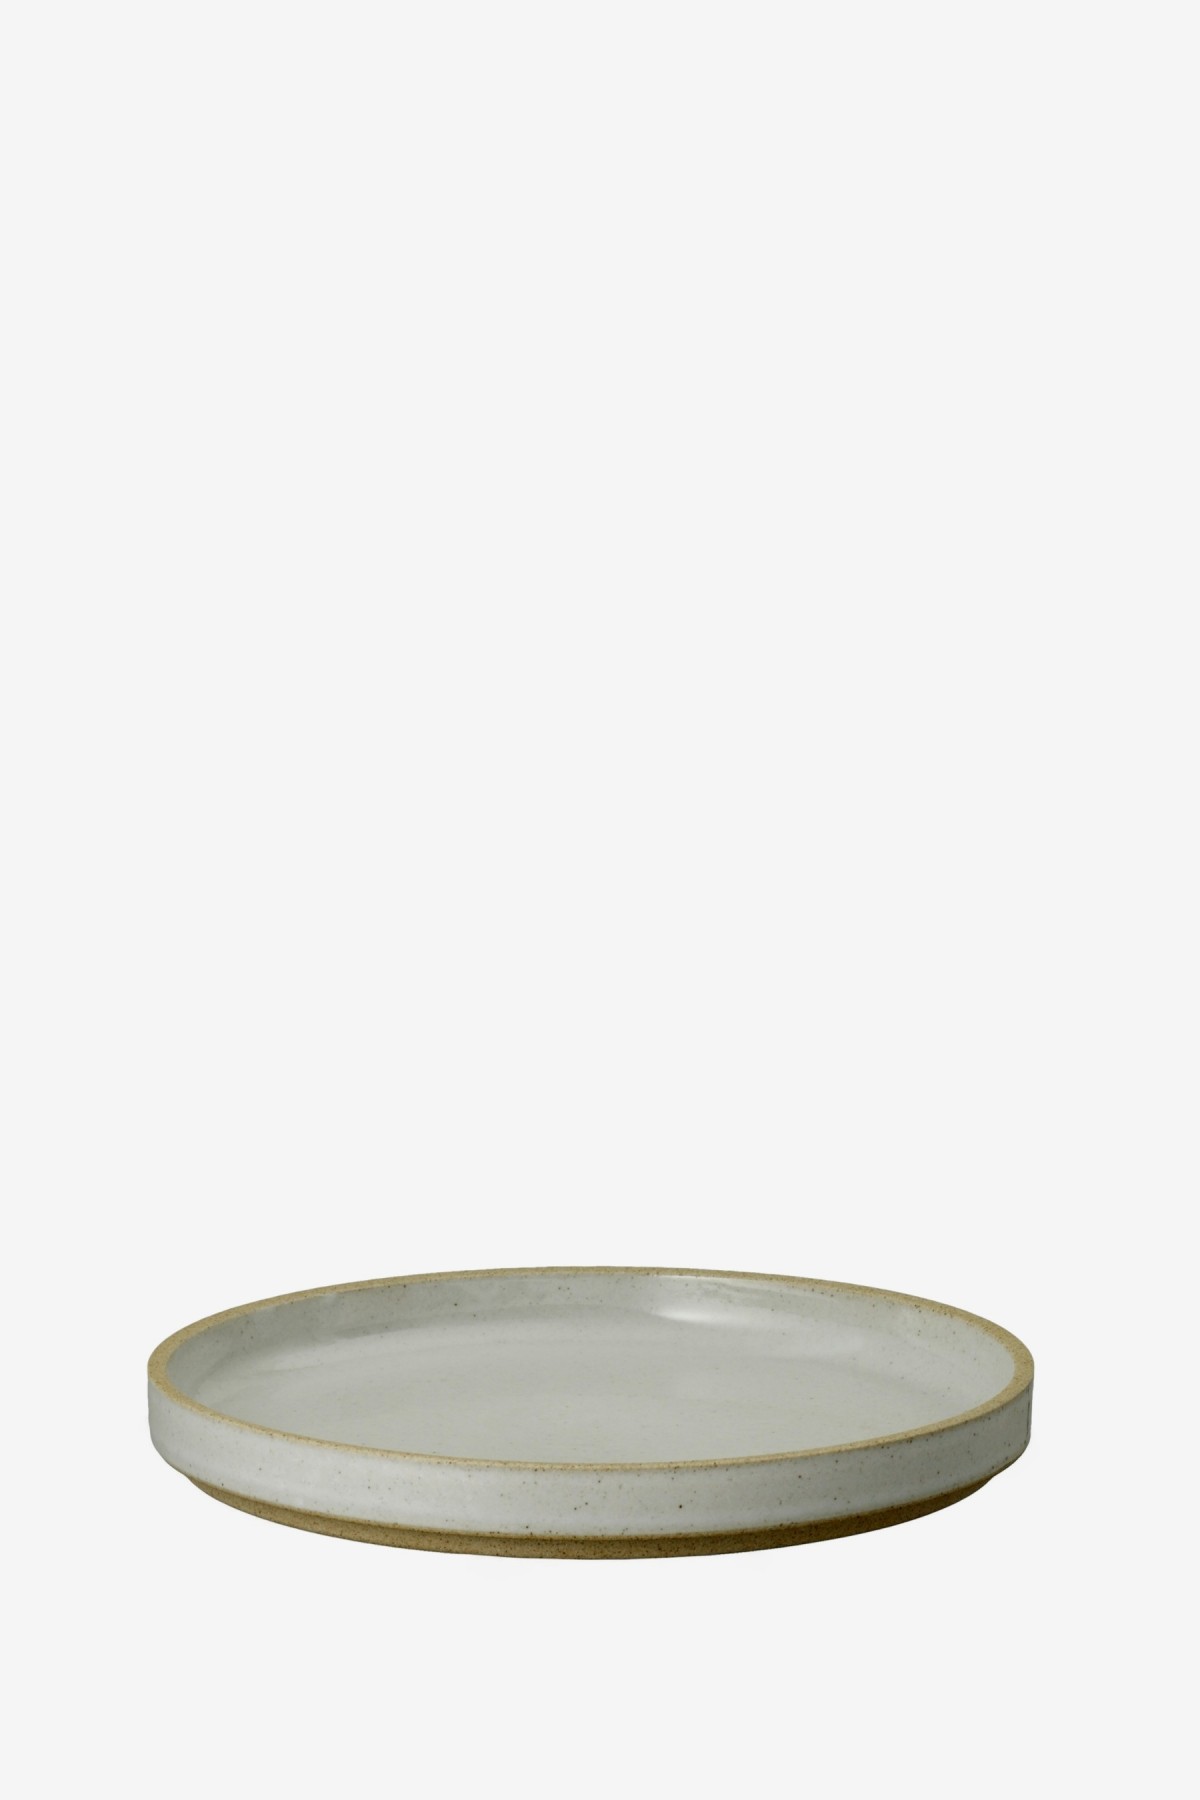 Hasami Porcelain Plate 185×21mm in Clear Grey